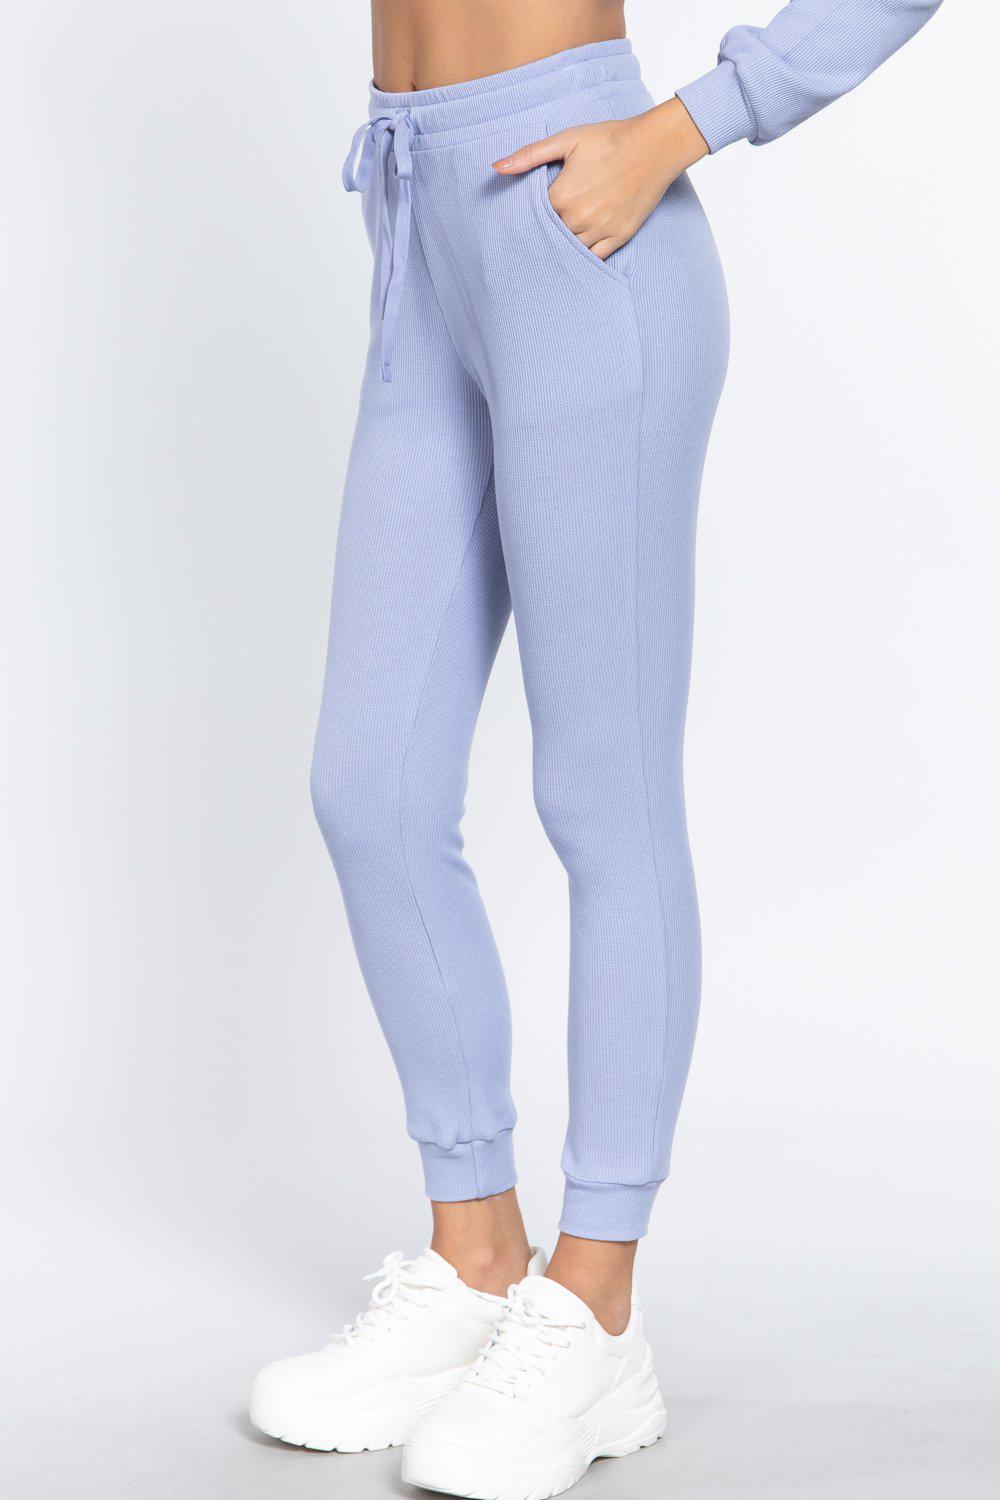 Waist Band Side Pocket Thermal Pants-[Adult]-[Female]-Blue Zone Planet